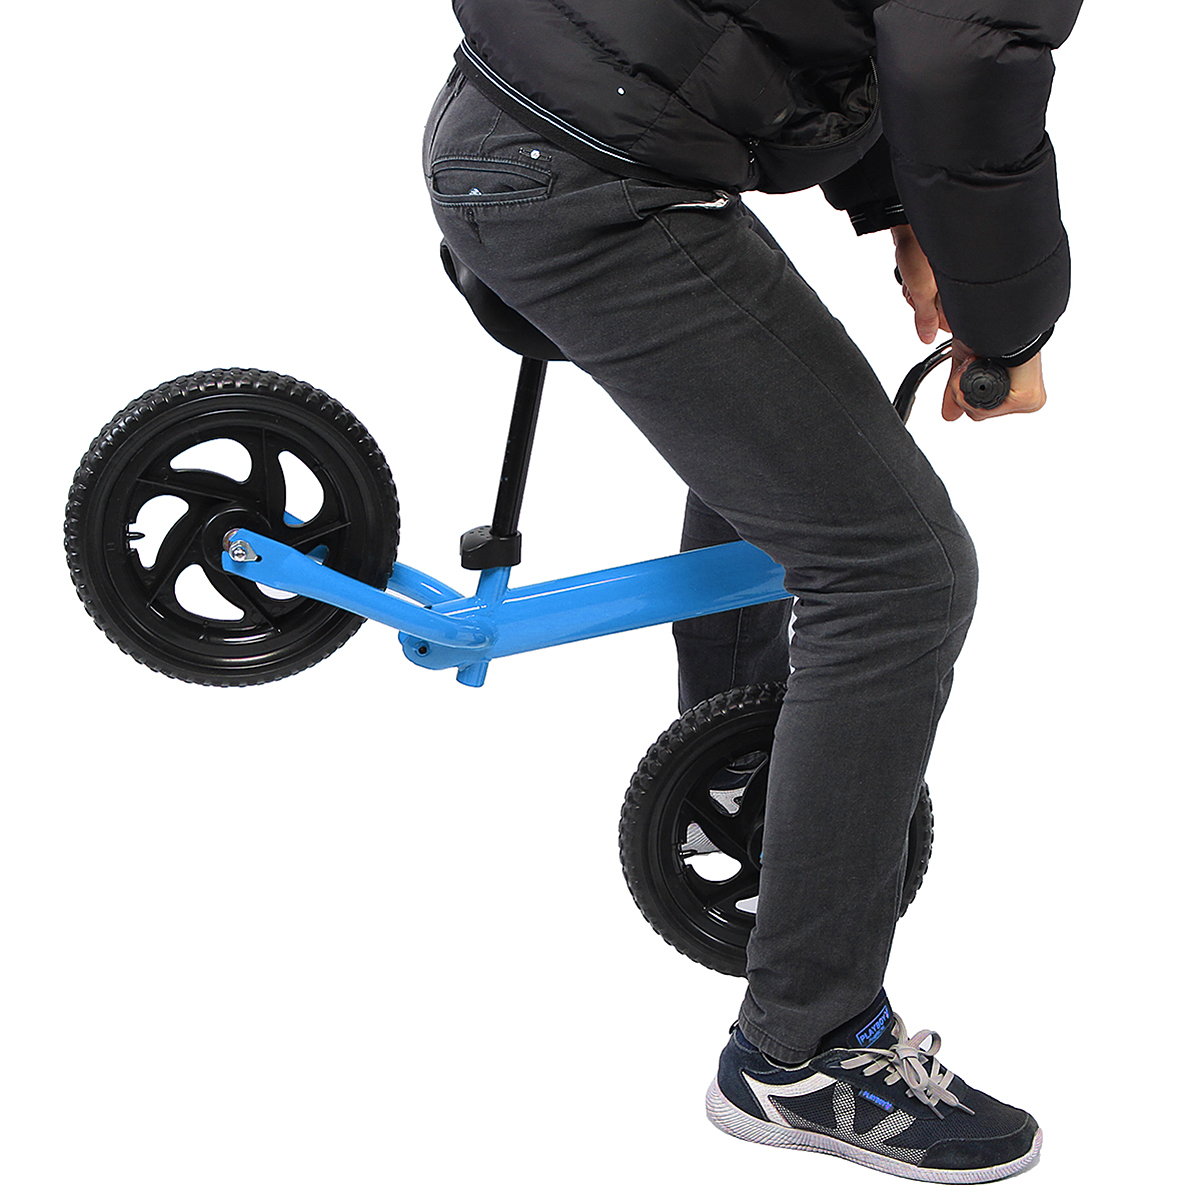 12quot-Kids-Balance-Bike-No-Pedal-Learn-To-Ride-Strider-Pre-Bike-Adjustable-Seat-1257937